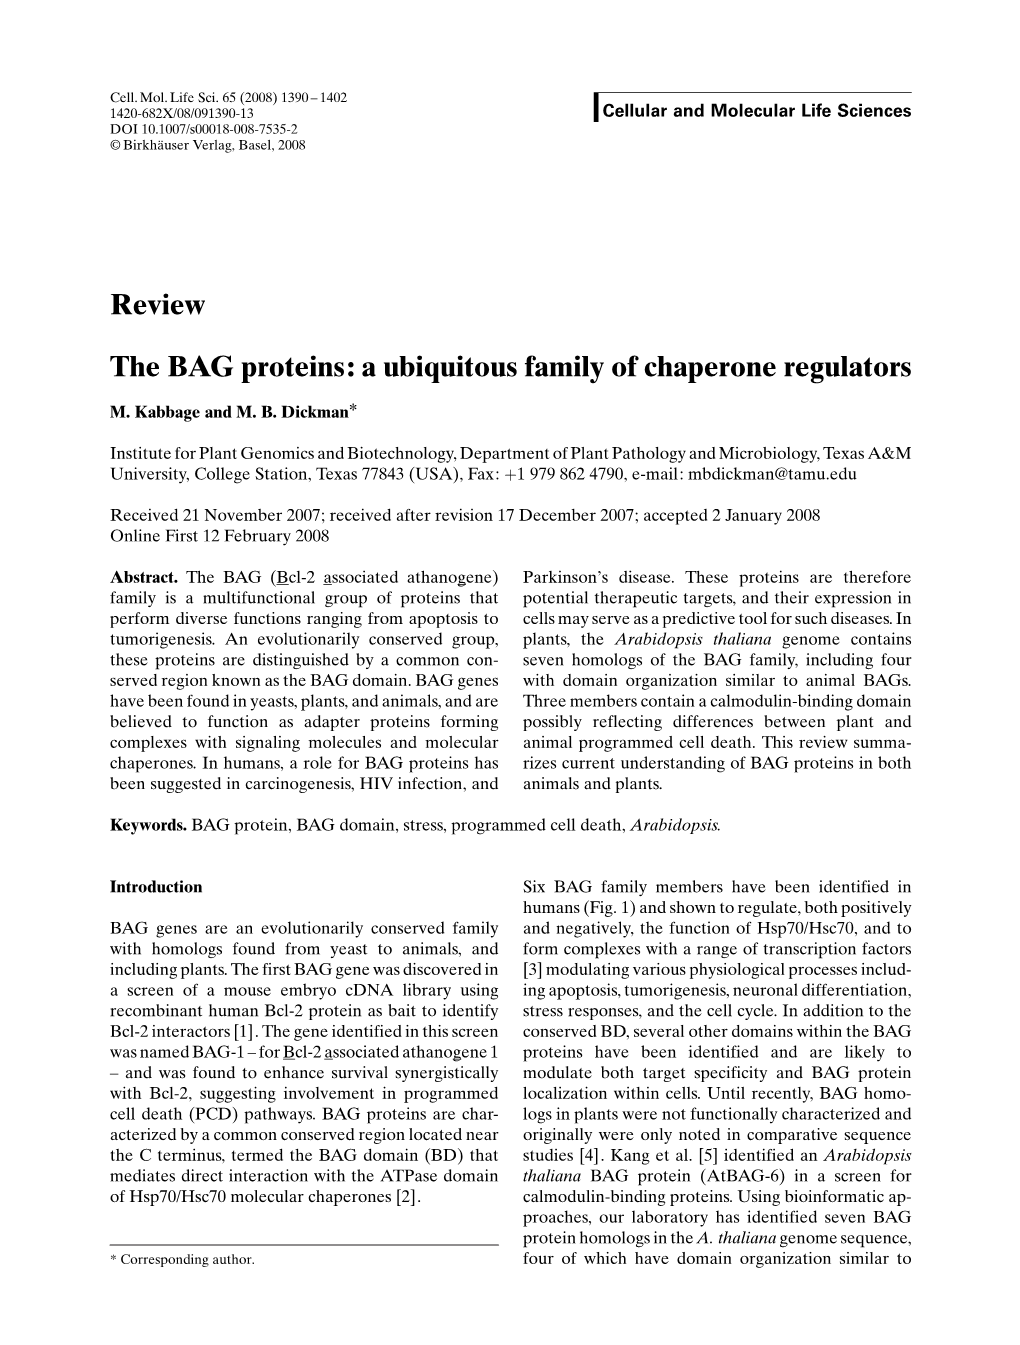 Review the BAG Proteins: a Ubiquitous Family of Chaperone